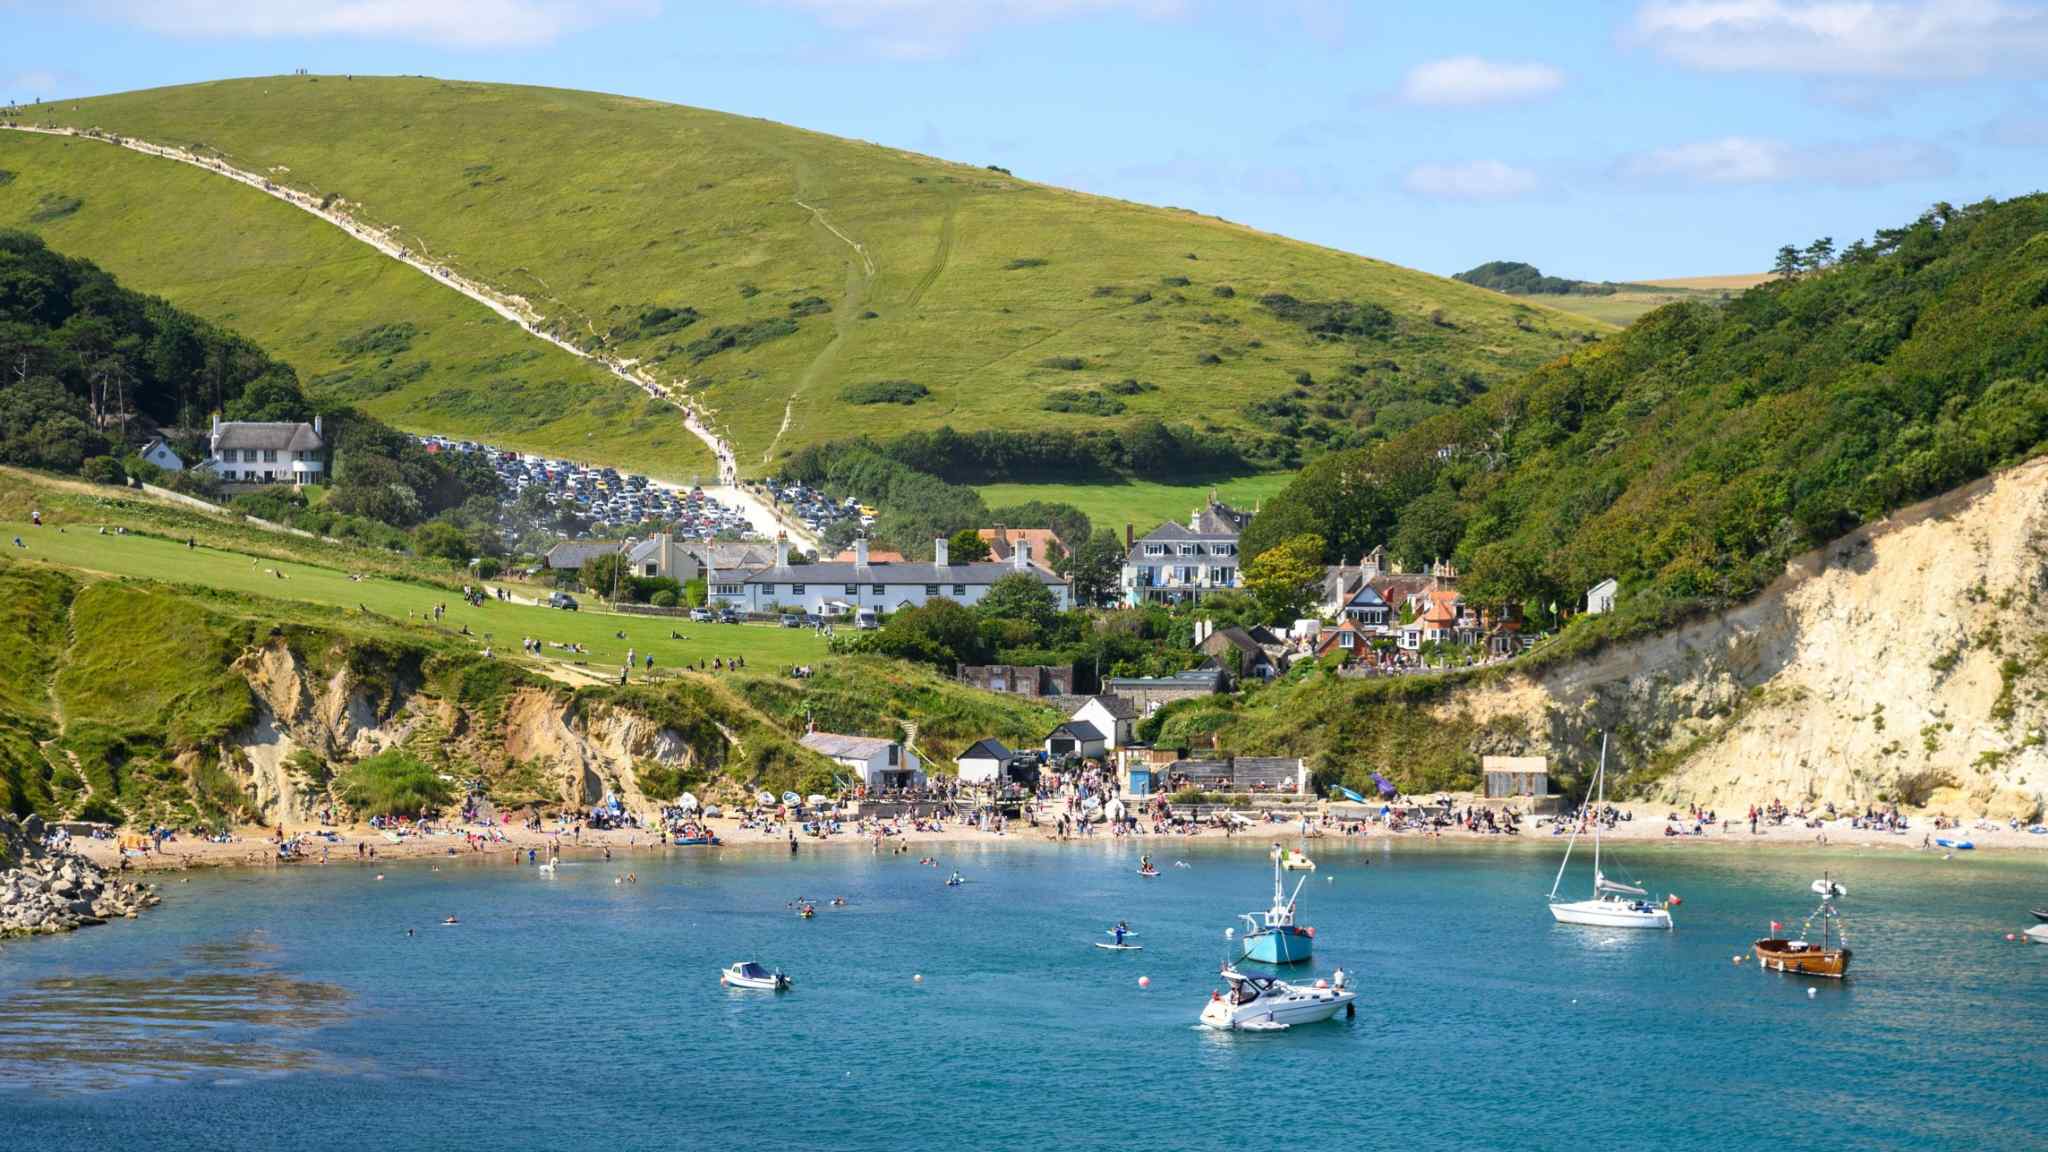 Not so far from the madding crowd: Dorset’s homebuying allure